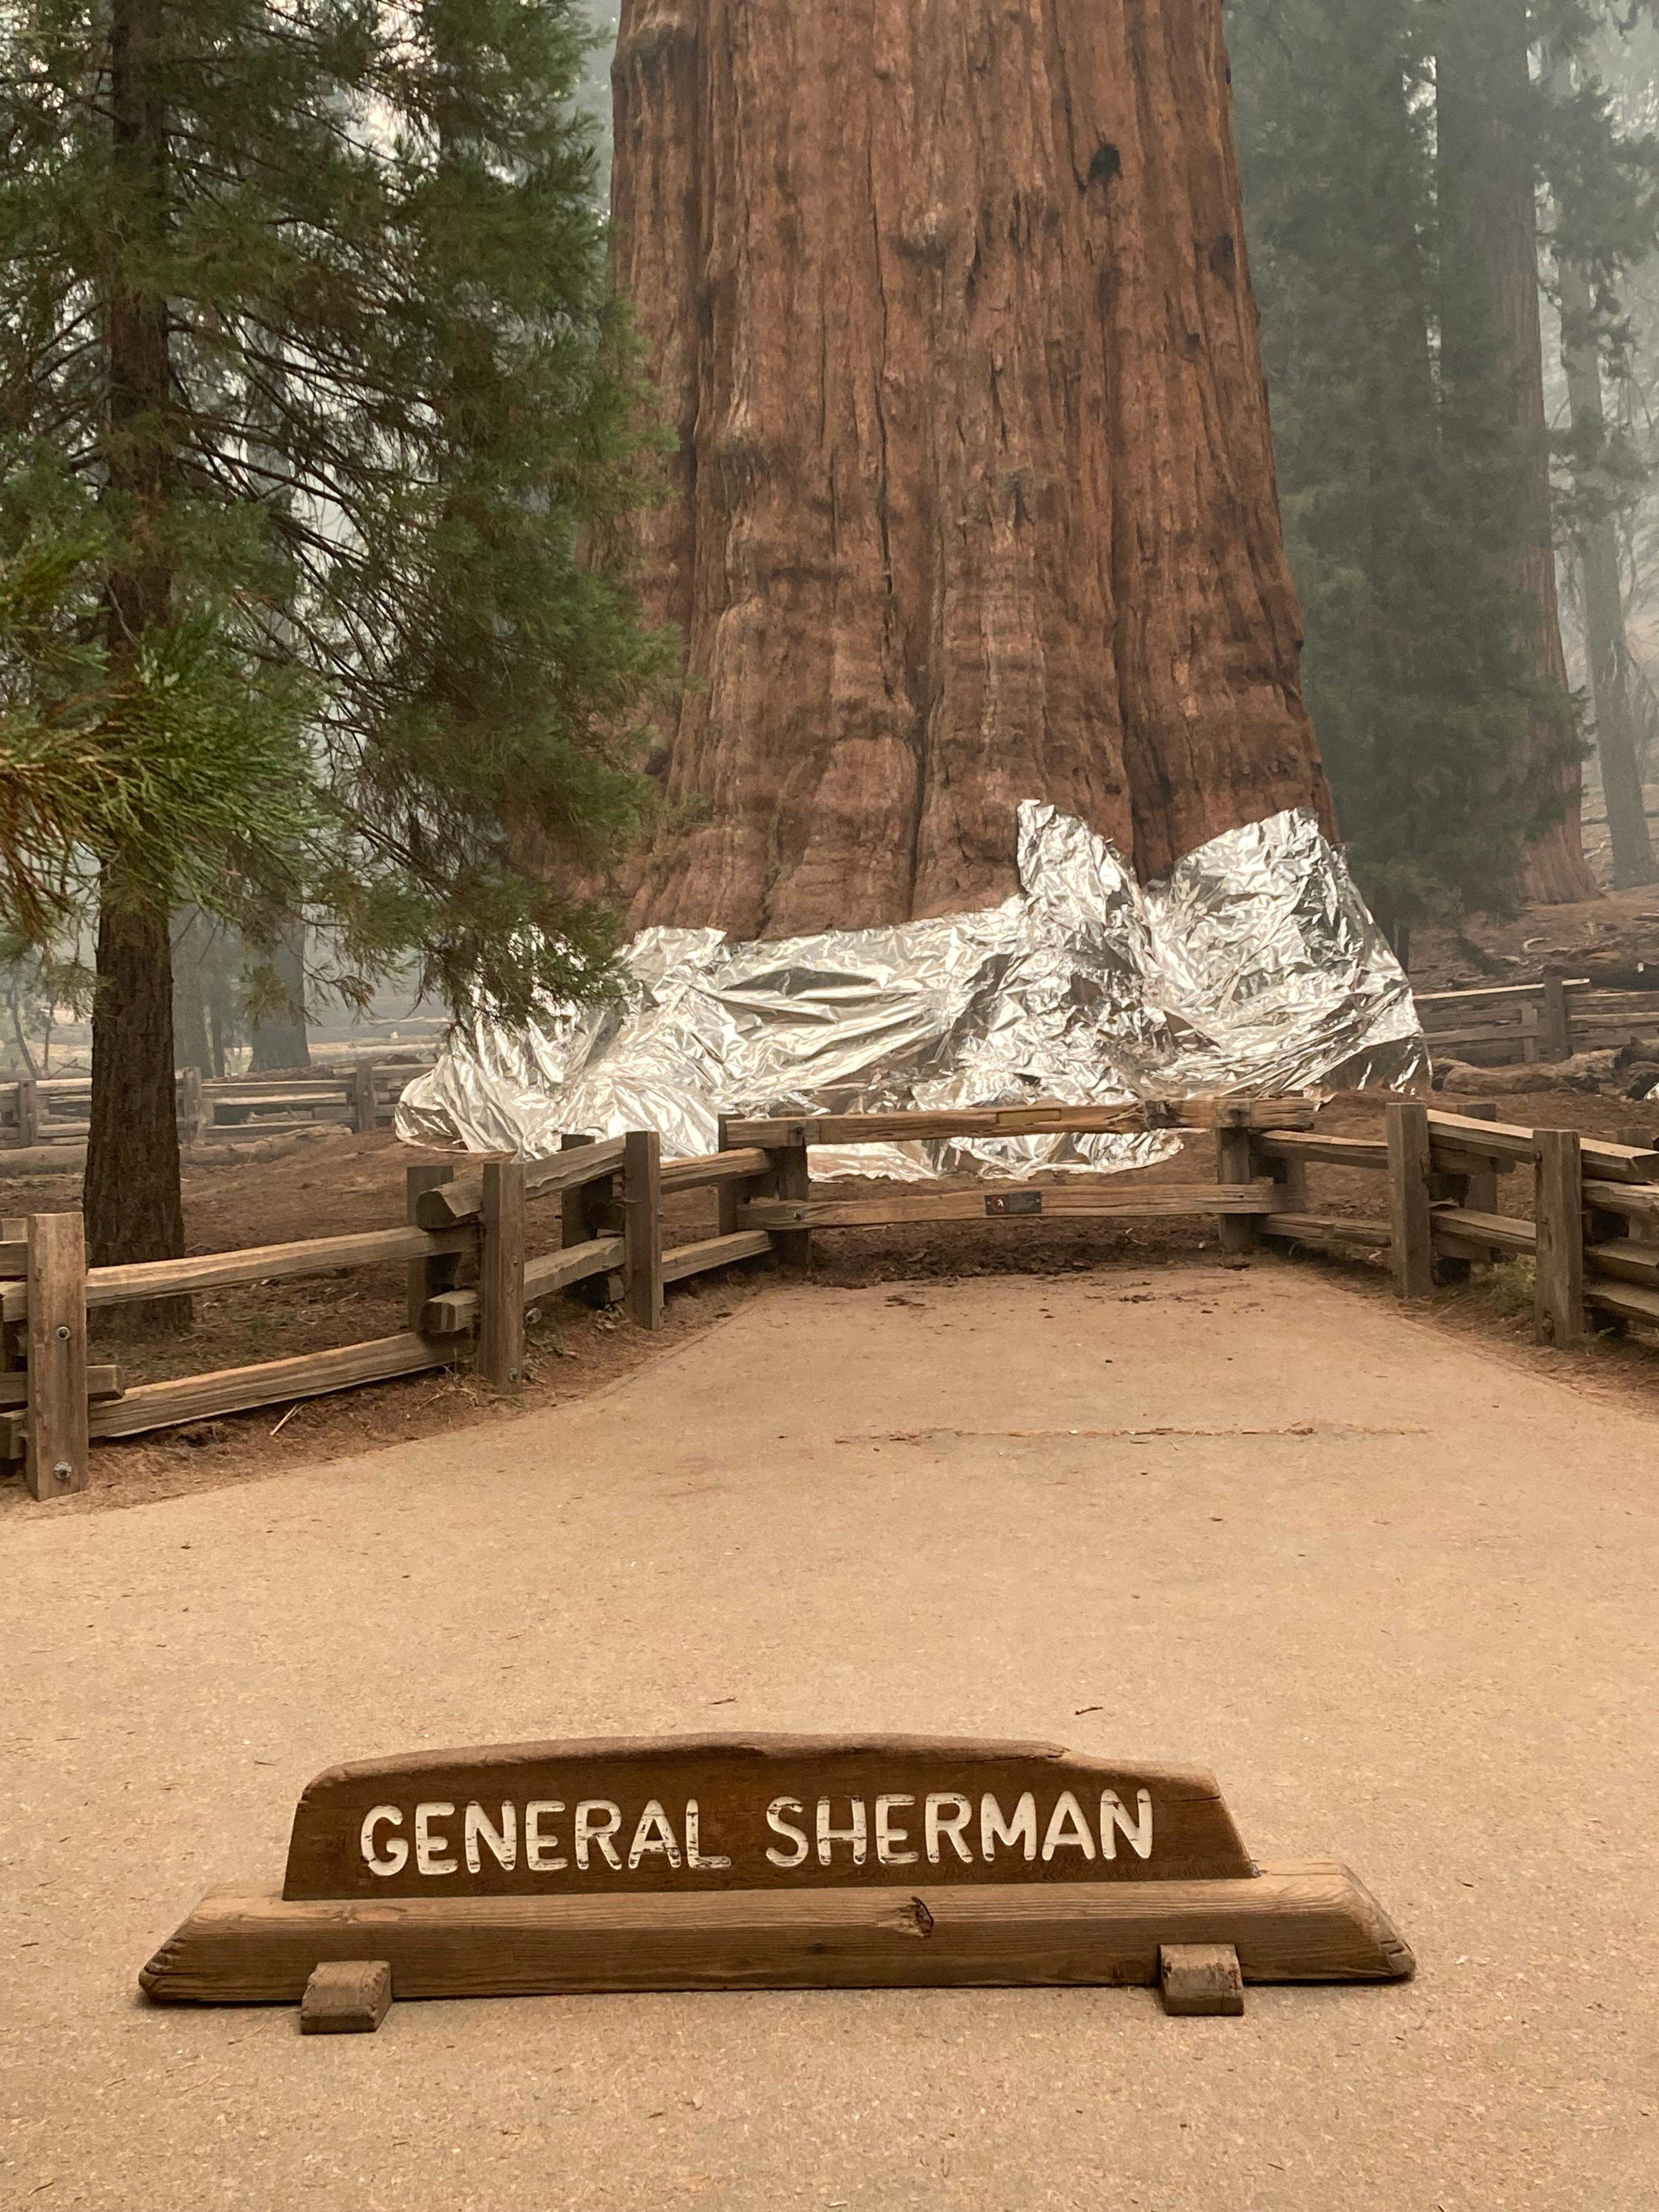 Lower portions of the giant Sequoia trees were wrapped in fire protective foil last week as the threat of wildfire intensified